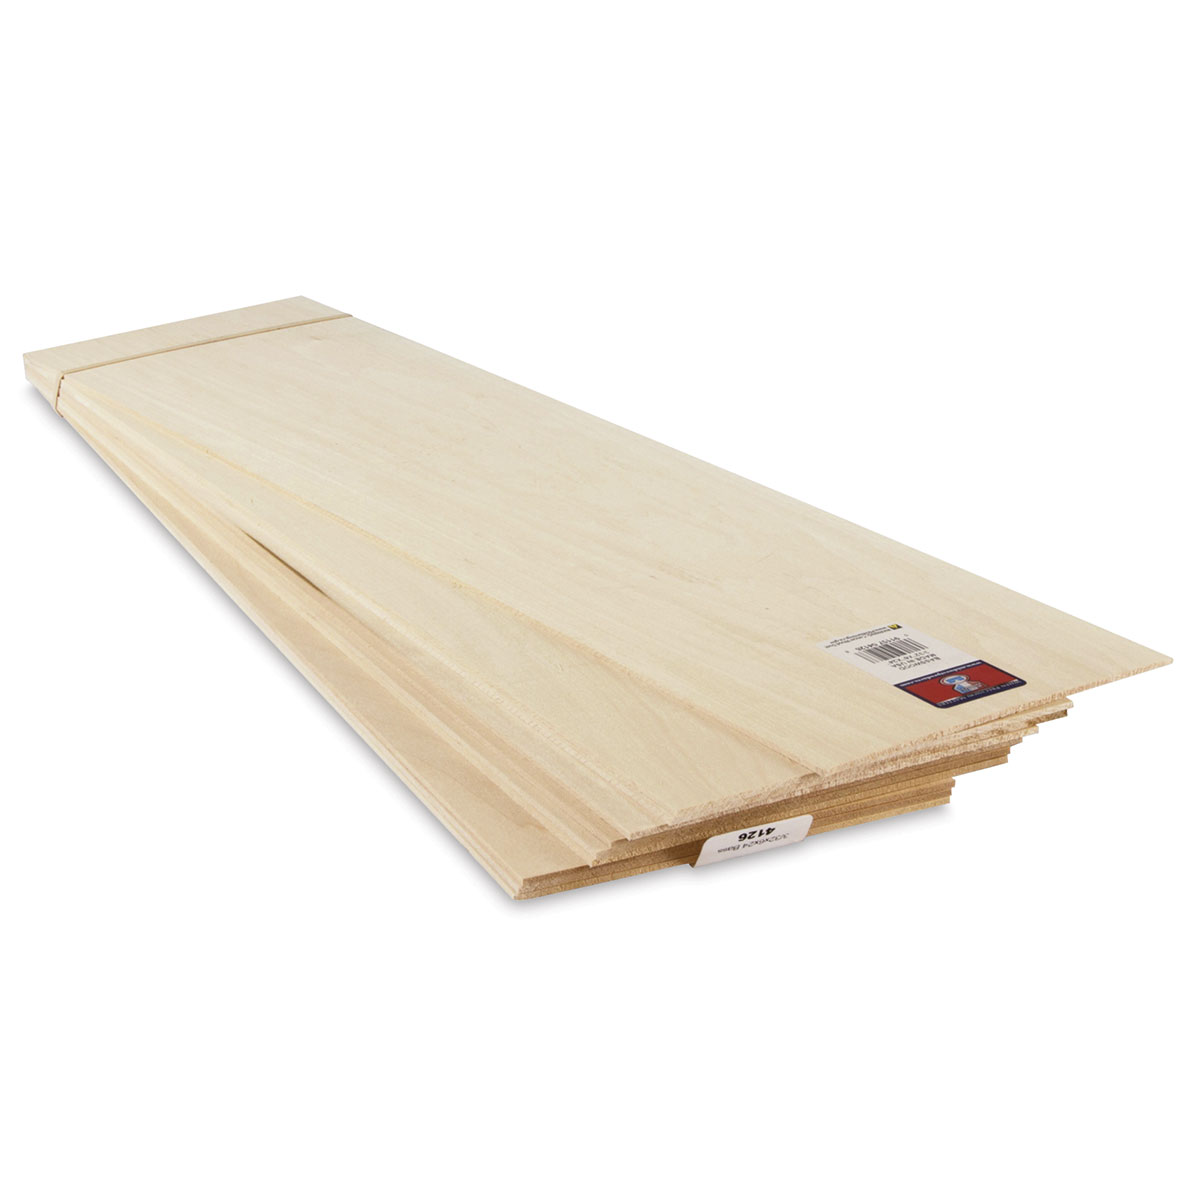 Midwest Products 4402 Basswood Sheet, 24 in L, 4 in W, Basswood 10 Pack  #VORG4635579, 4402